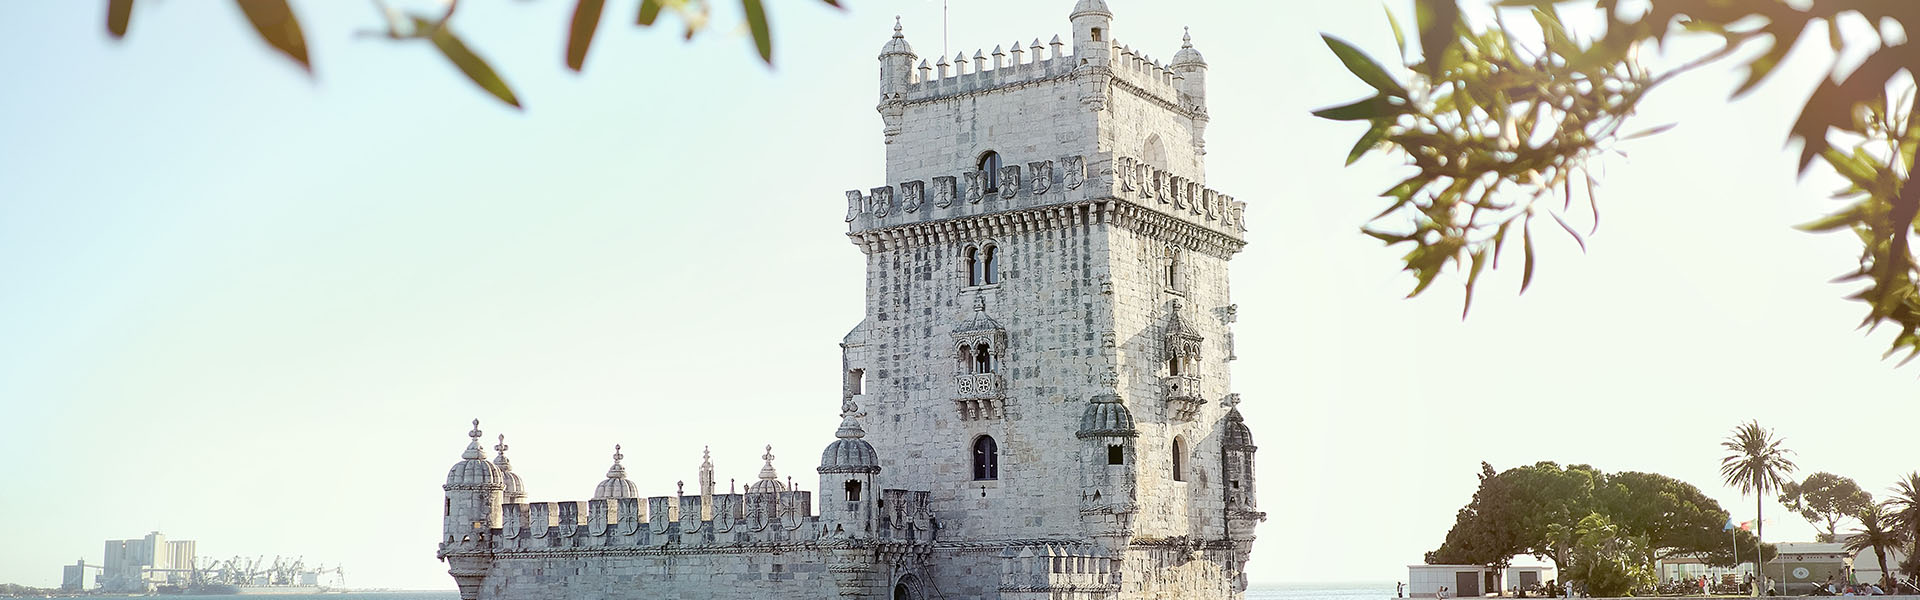 Belem Tower in Portual on coast with tourists